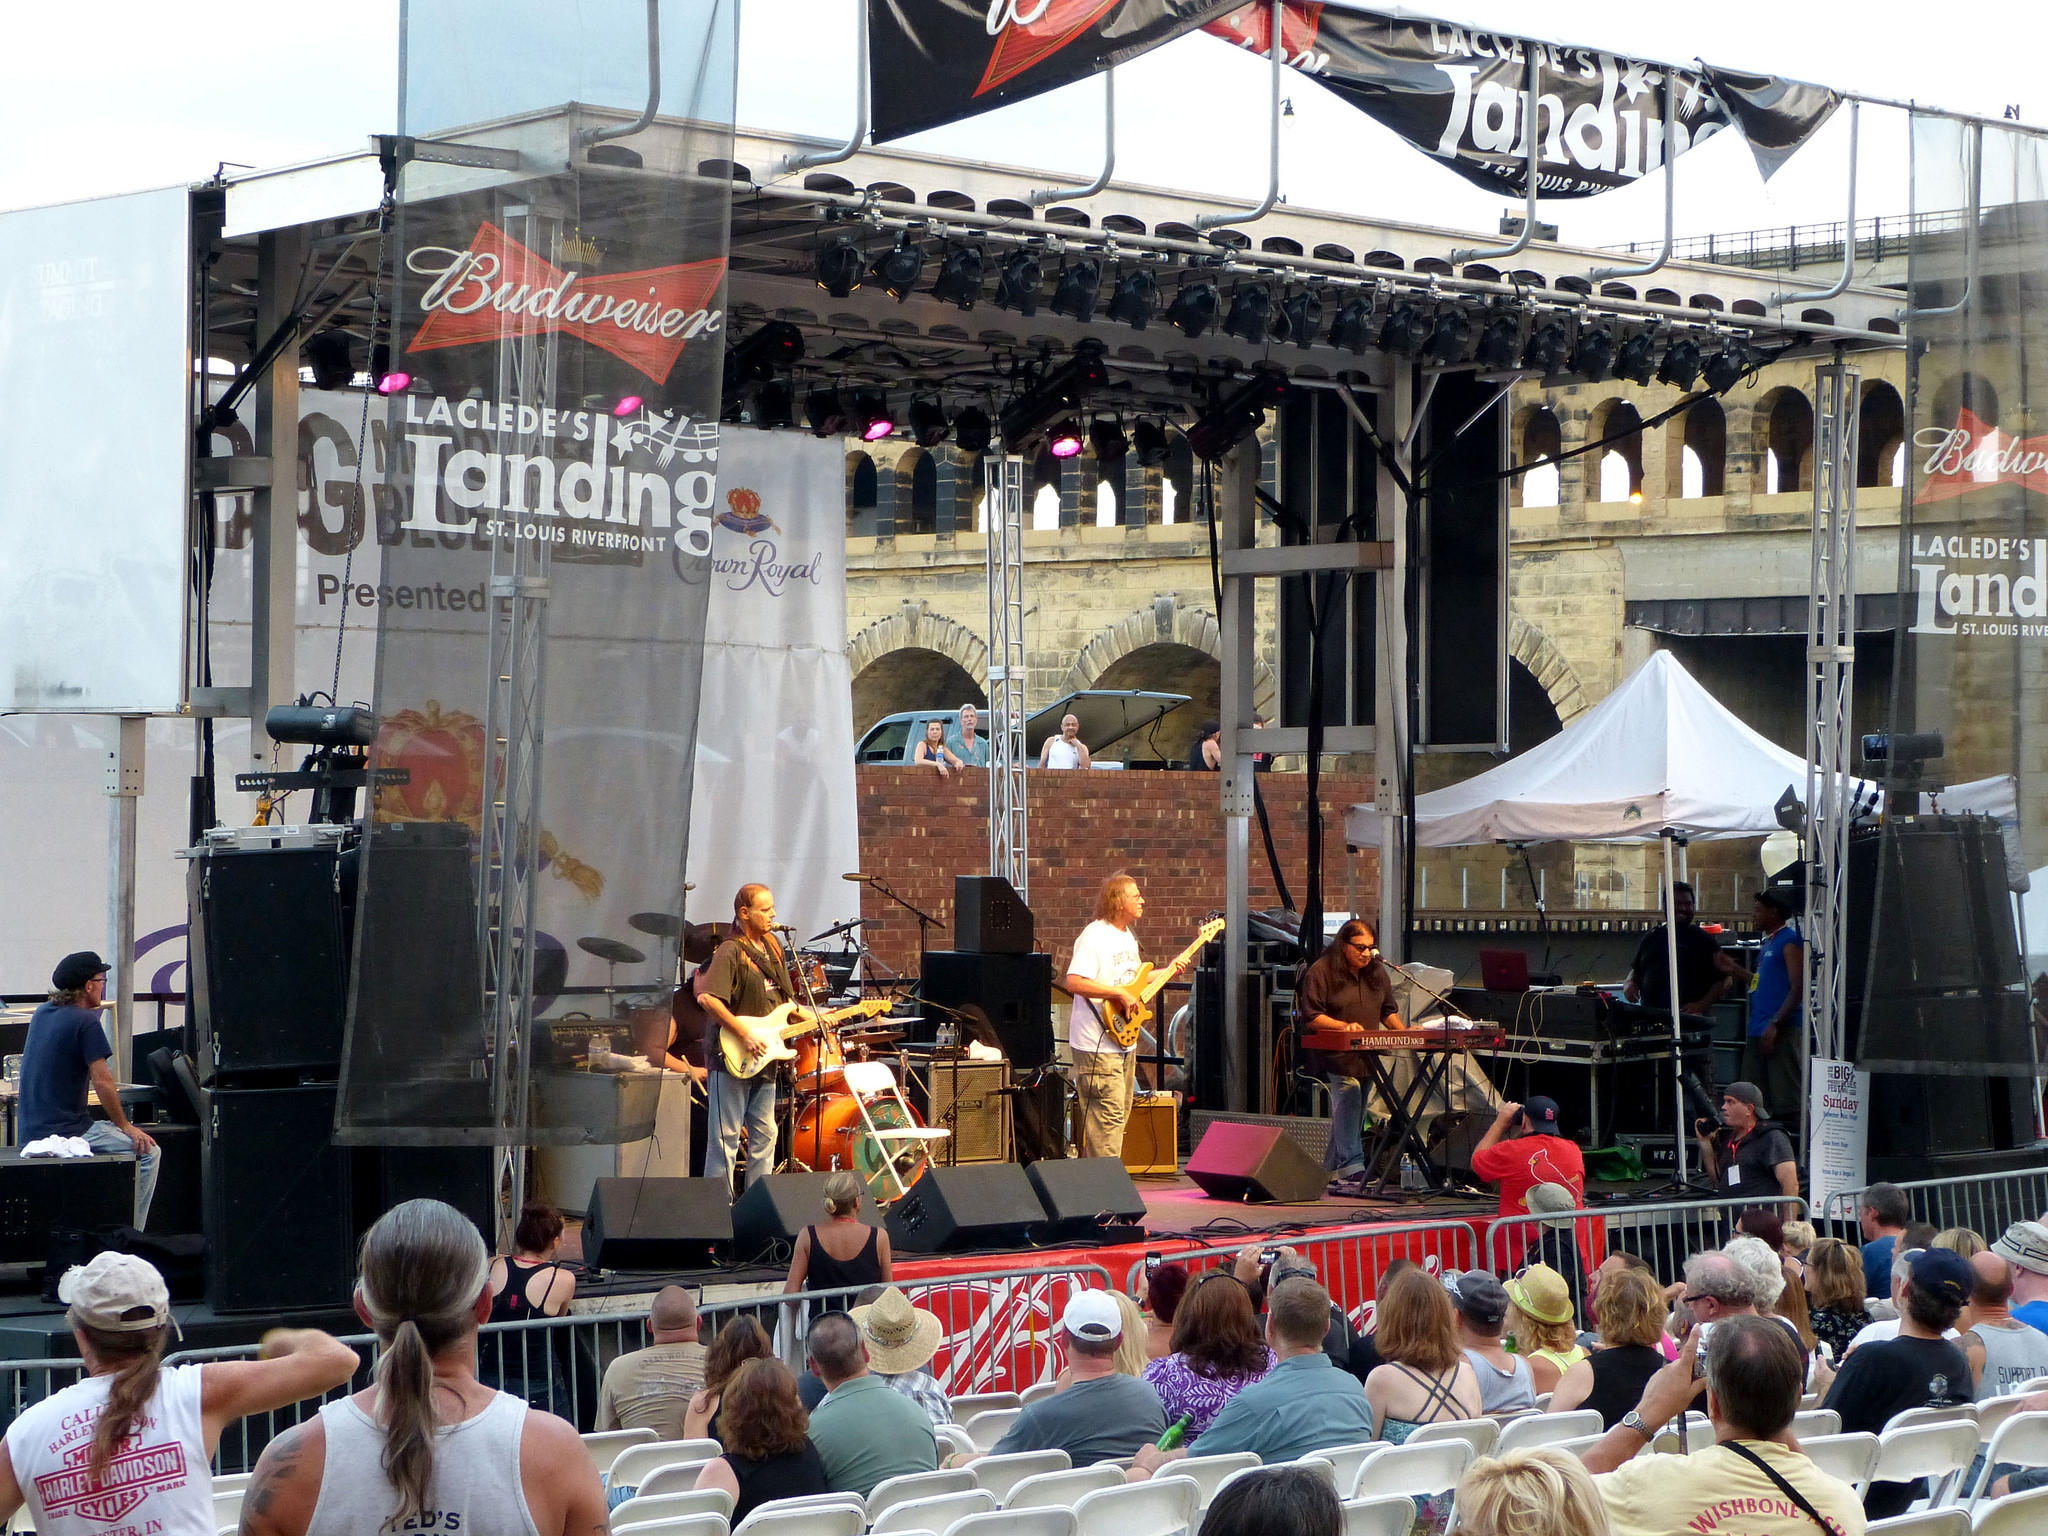 Big Muddy Blues Festival is this weekend on Laclede's Landing